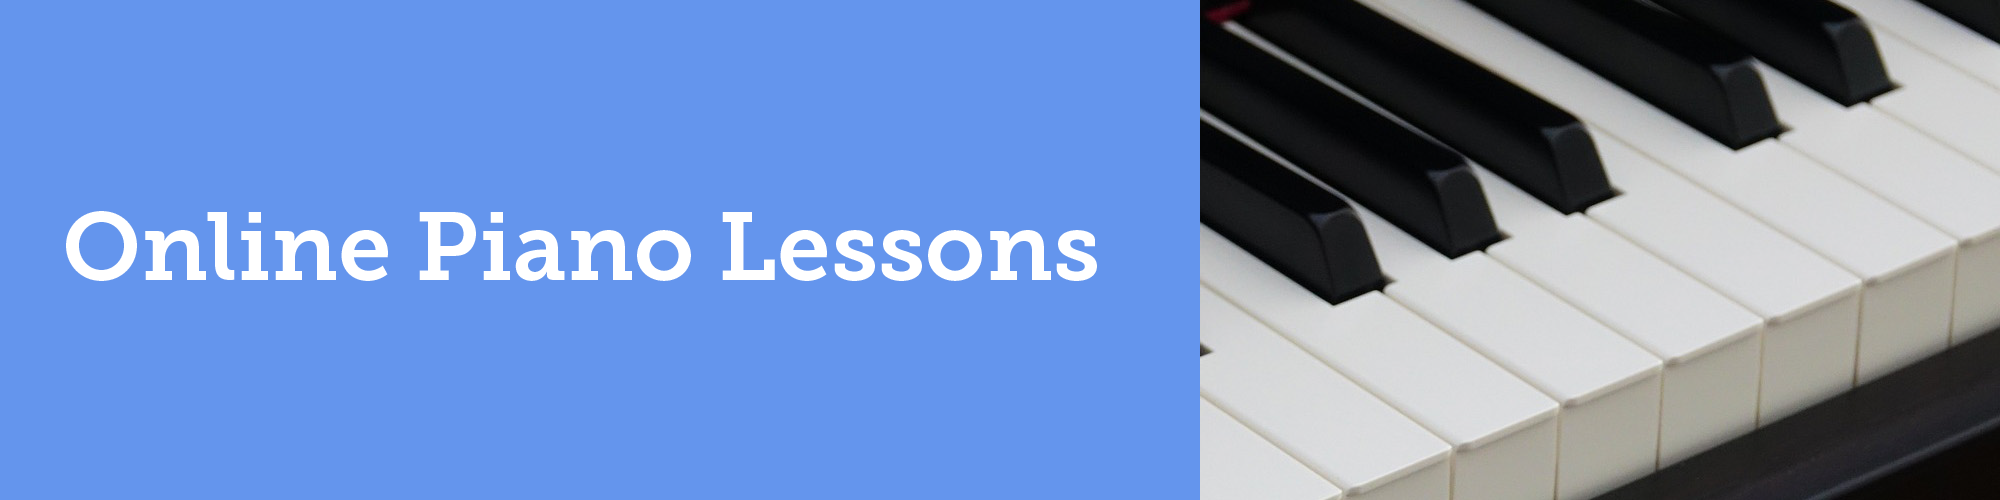 Online piano lessons with Dr. Lory Peters